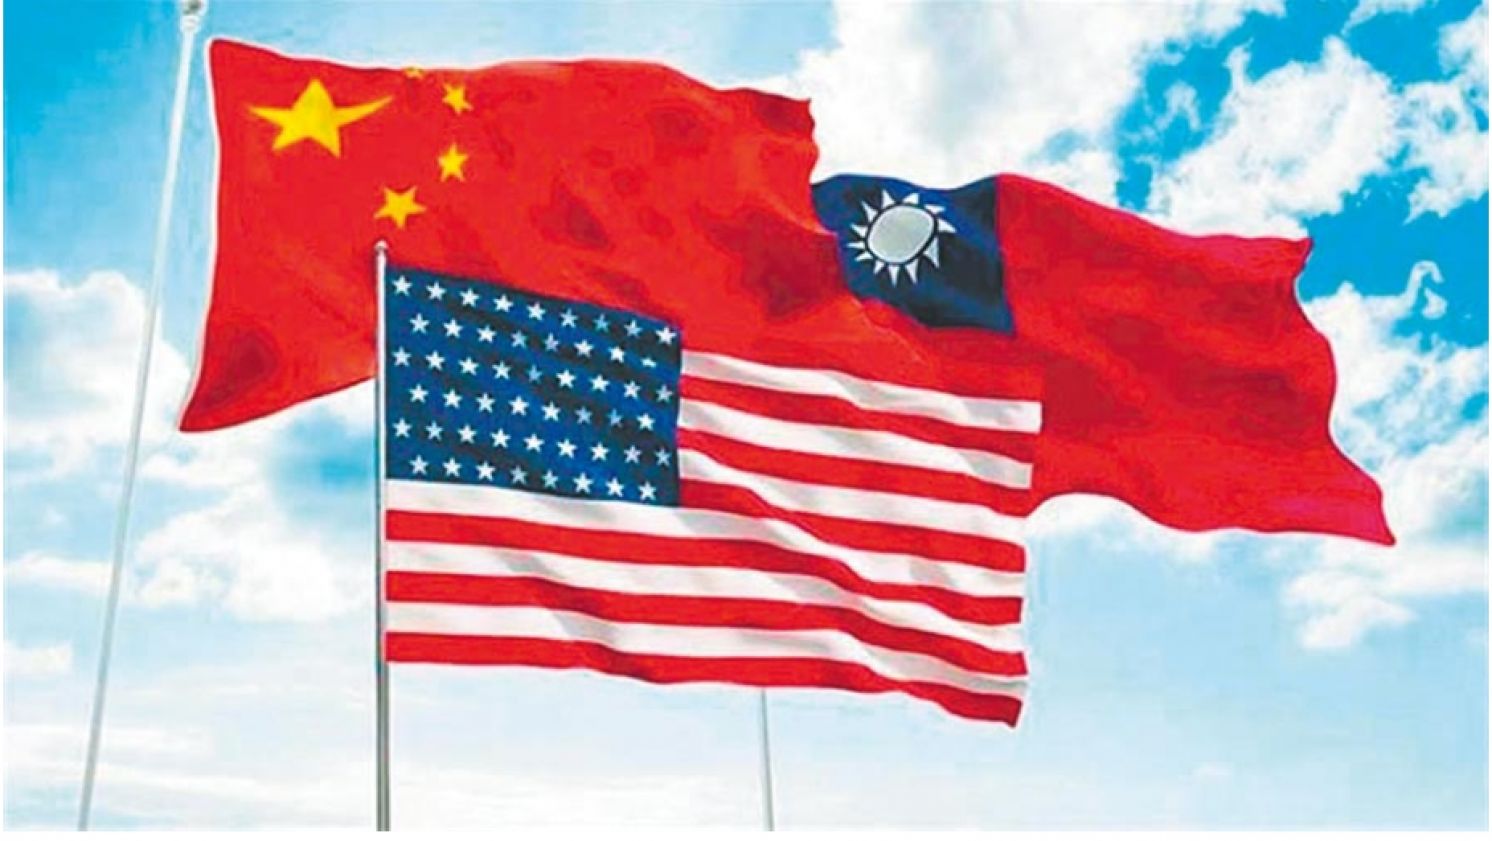 Taiwan Must Not Become a Pawn in U.S.-China Confrontation